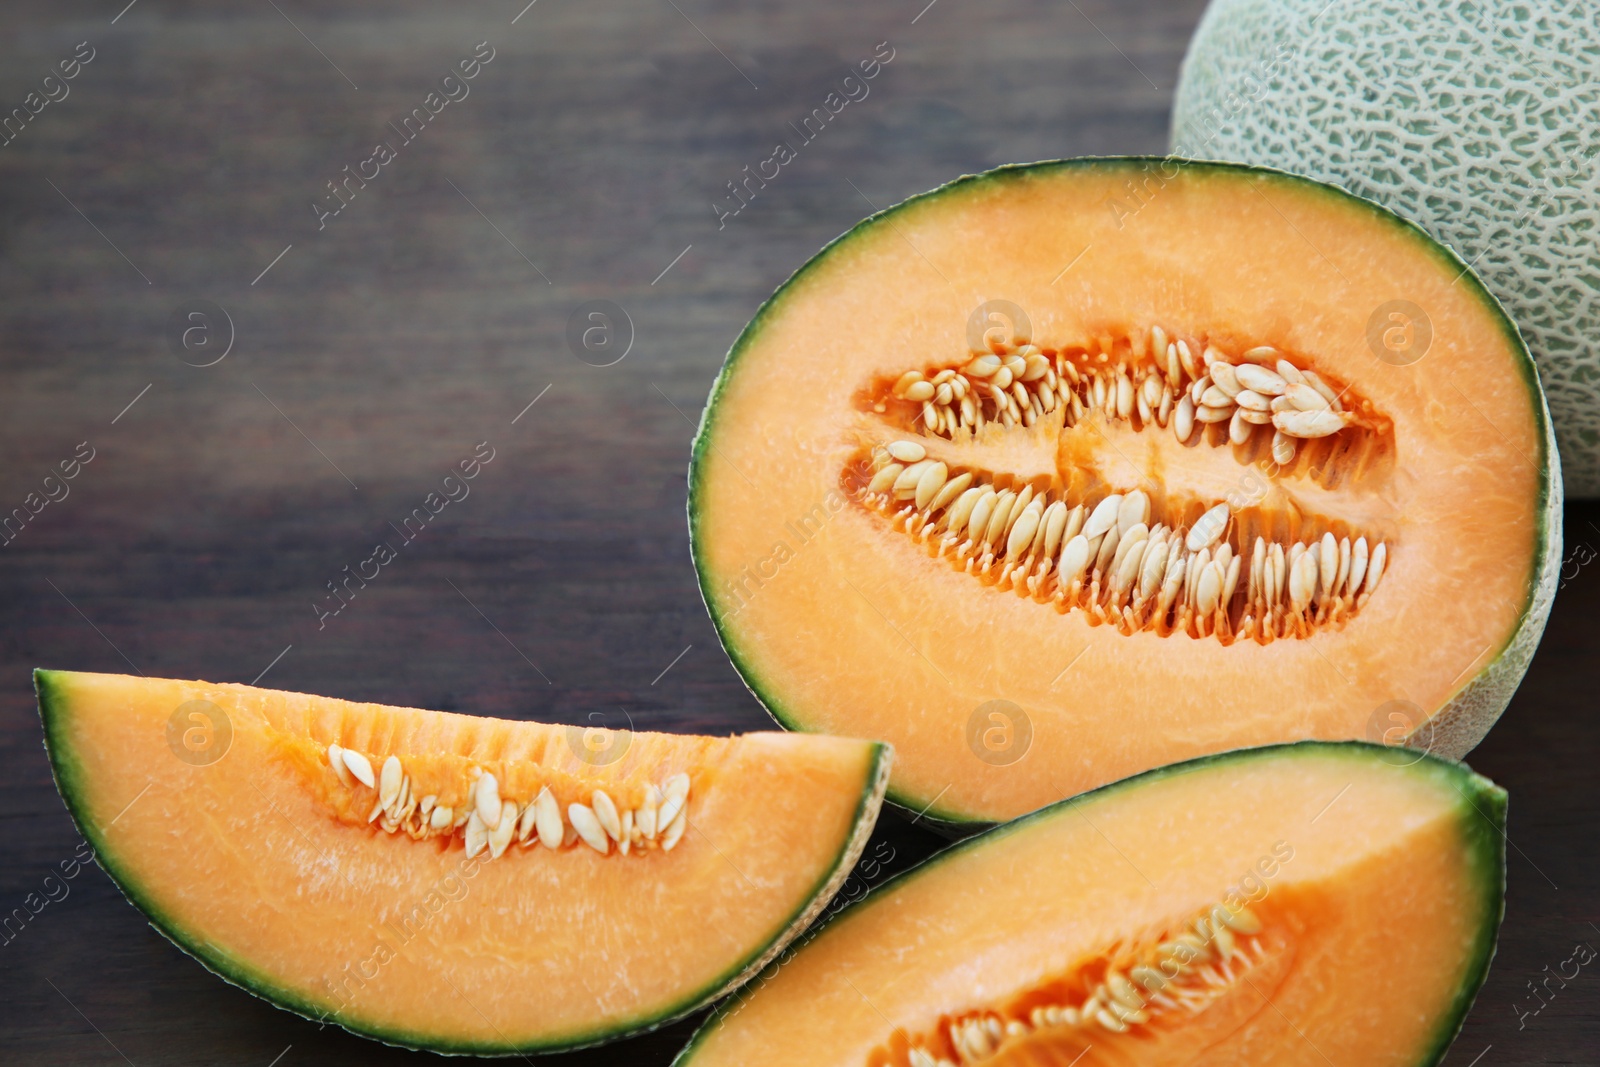 Photo of Tasty orange ripe melons on wooden table